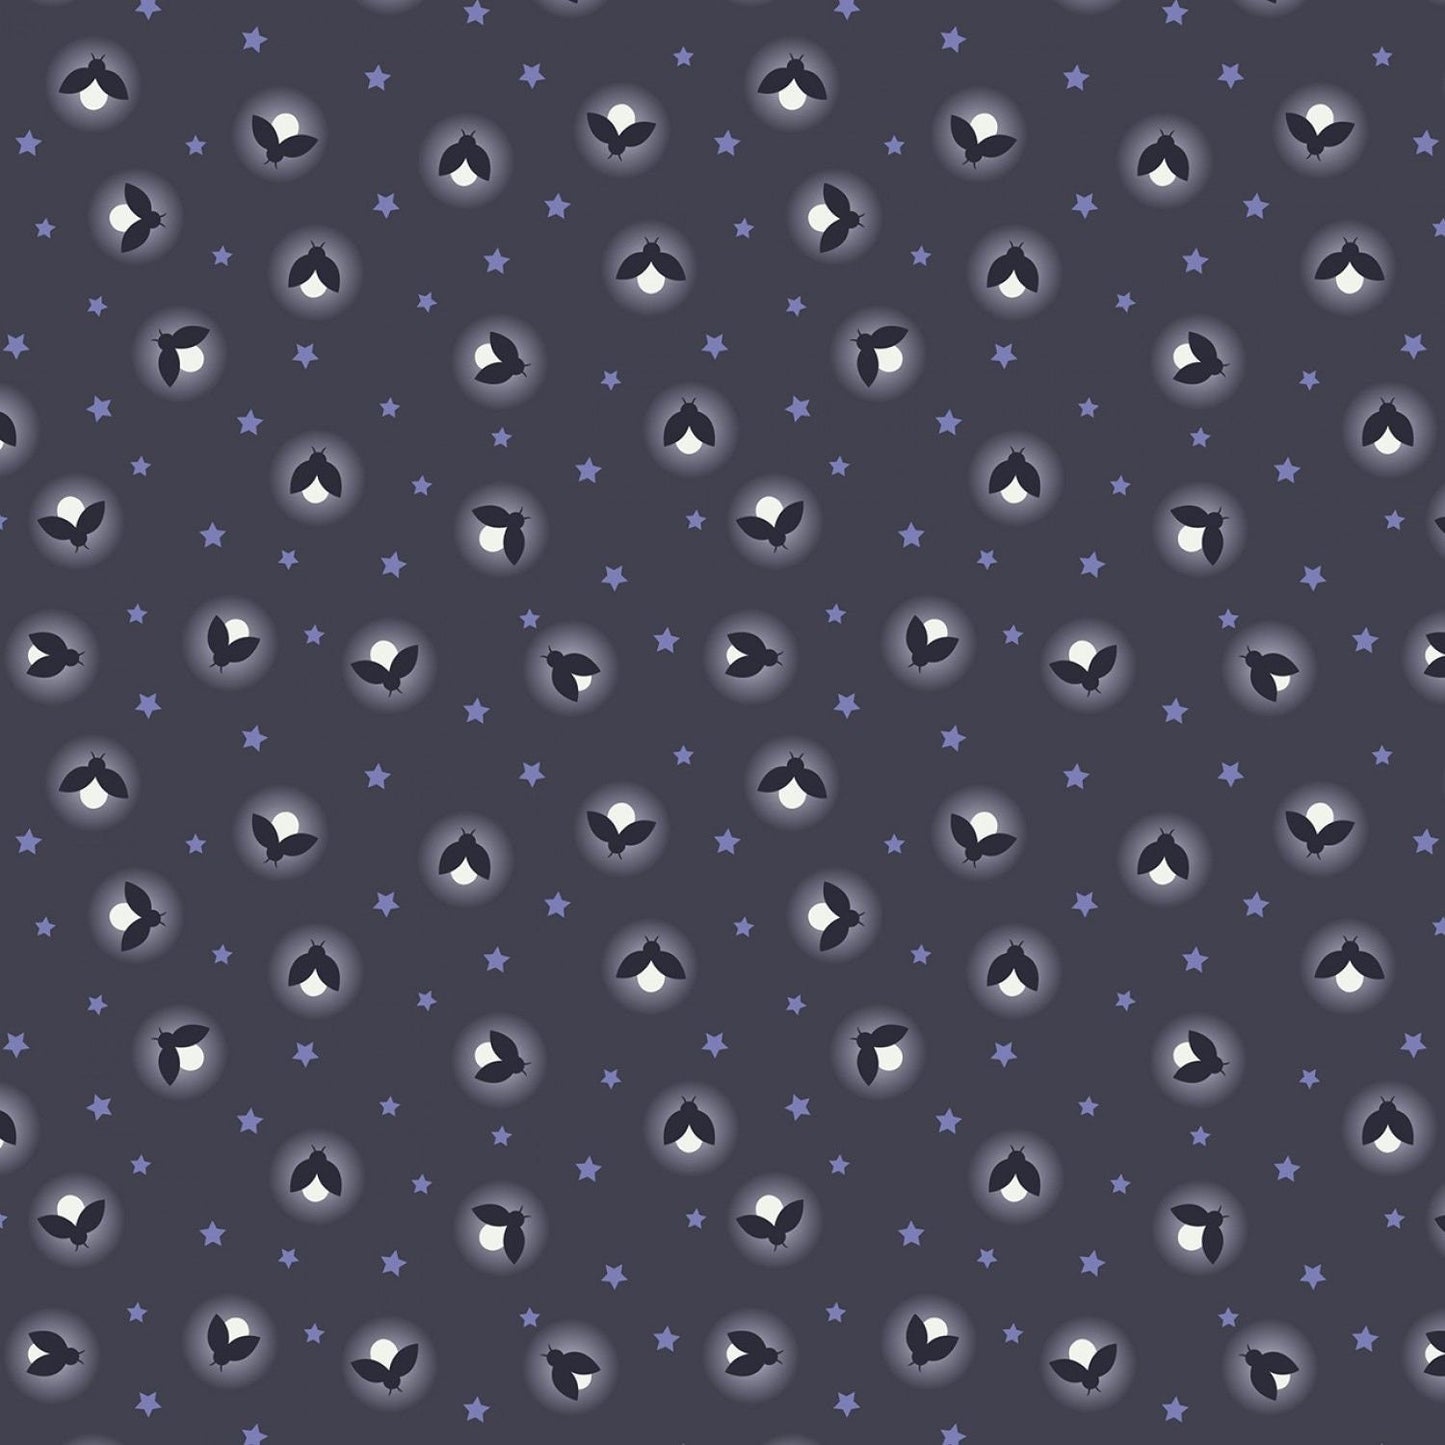 Nighttime in Bluebell Wood Fireflies Midnight Blue A475.2 Glow in the Dark Cotton Woven Fabric